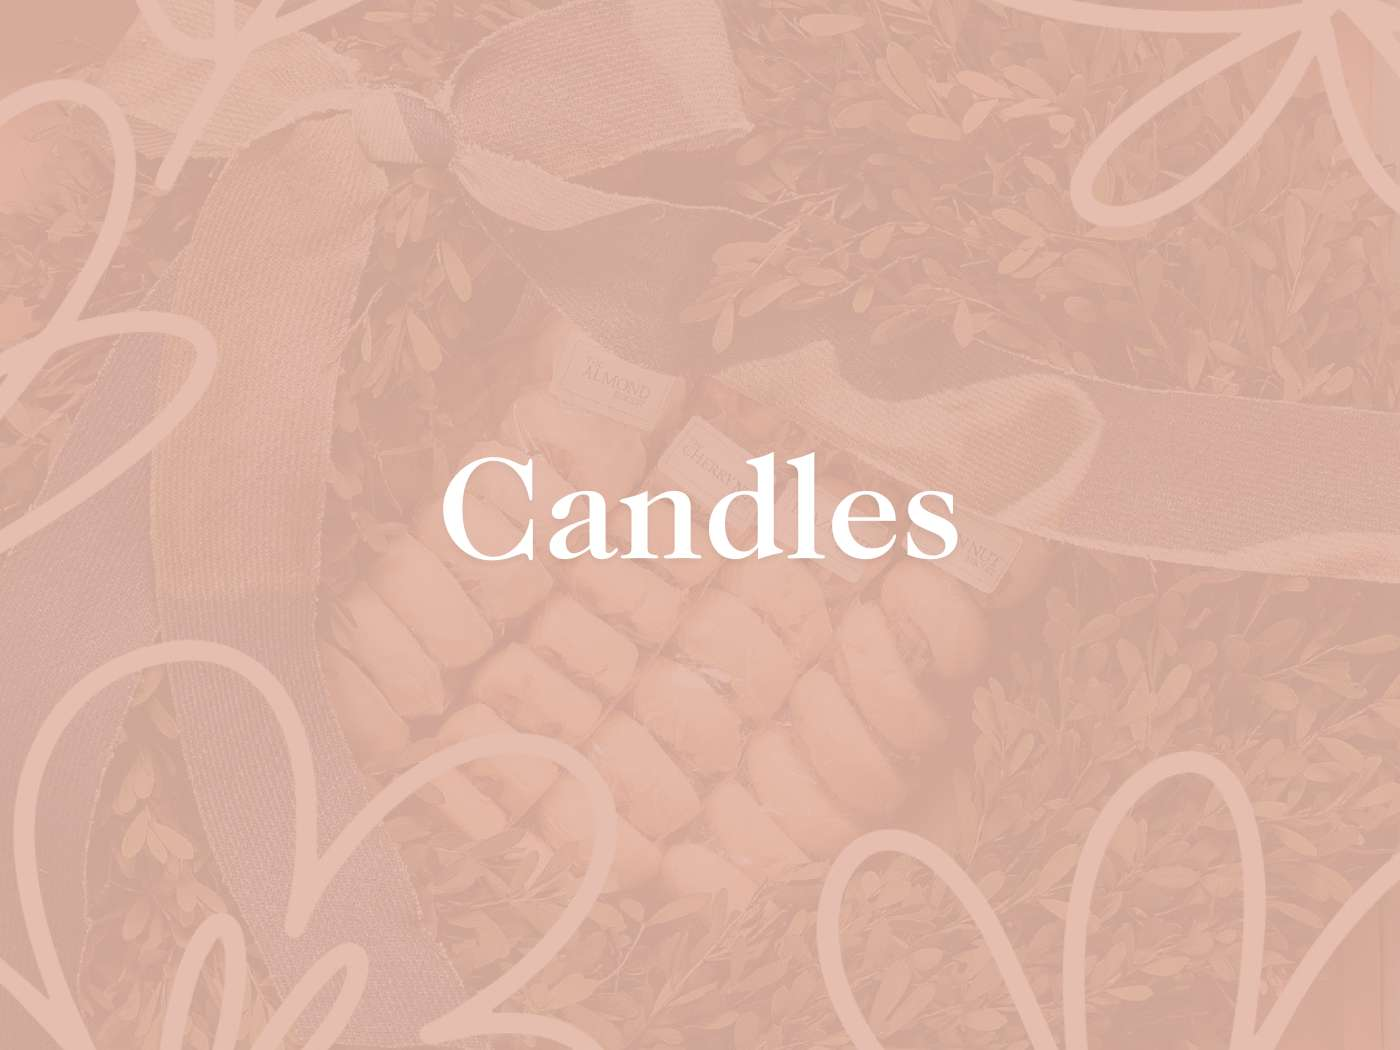 Assorted scented candles thoughtfully arranged amidst a bouquet of delicate florals, presenting an inviting Candles Collection - Fabulous Flowers and Gifts.